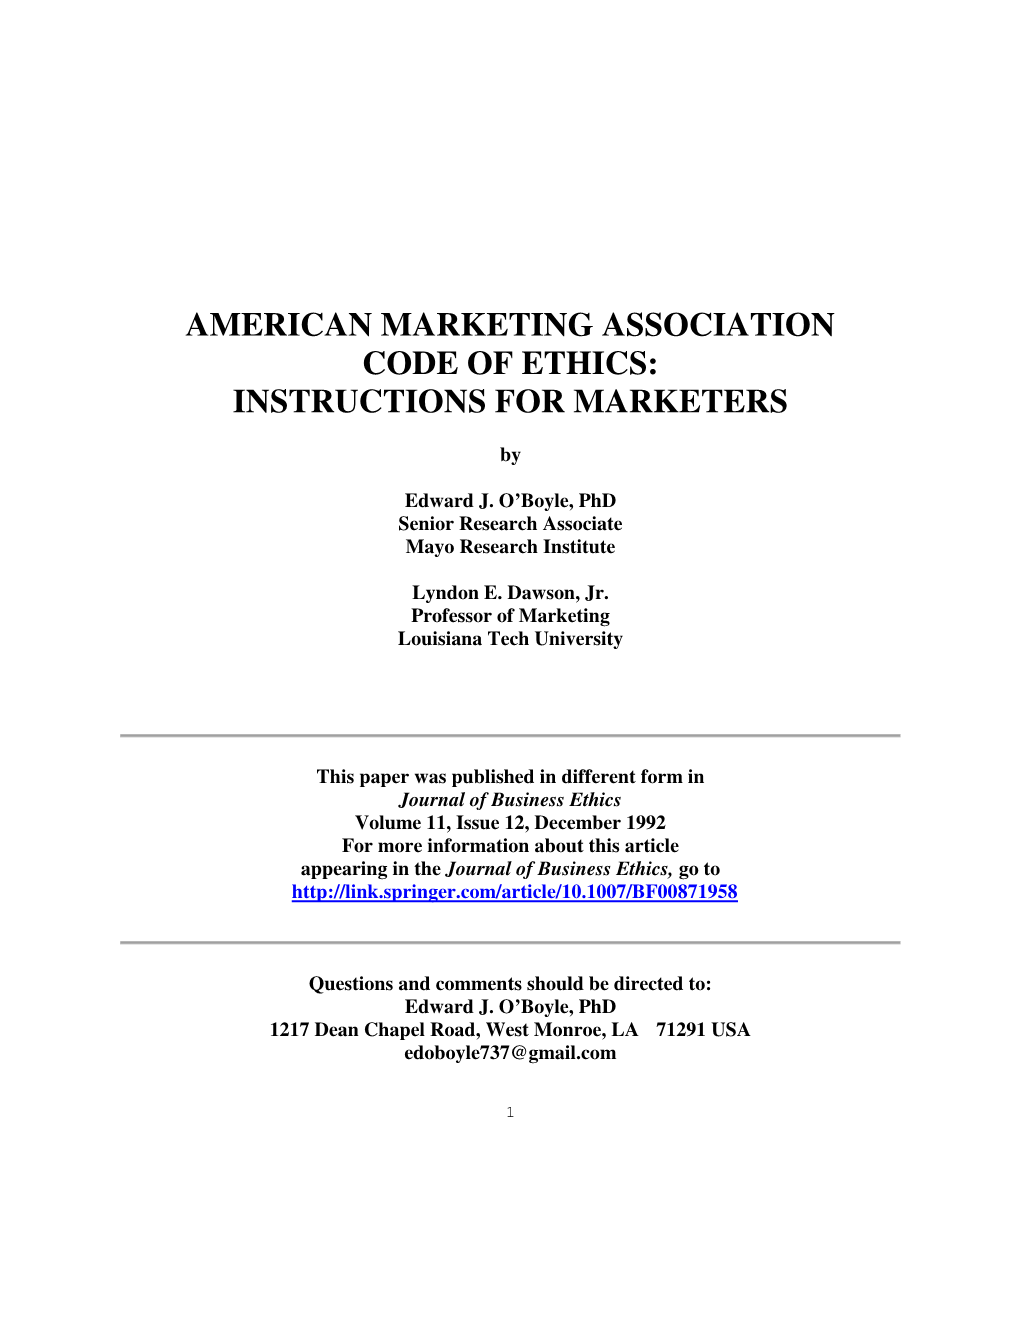 American Marketing Association Code of Ethics: Instructions for Marketers